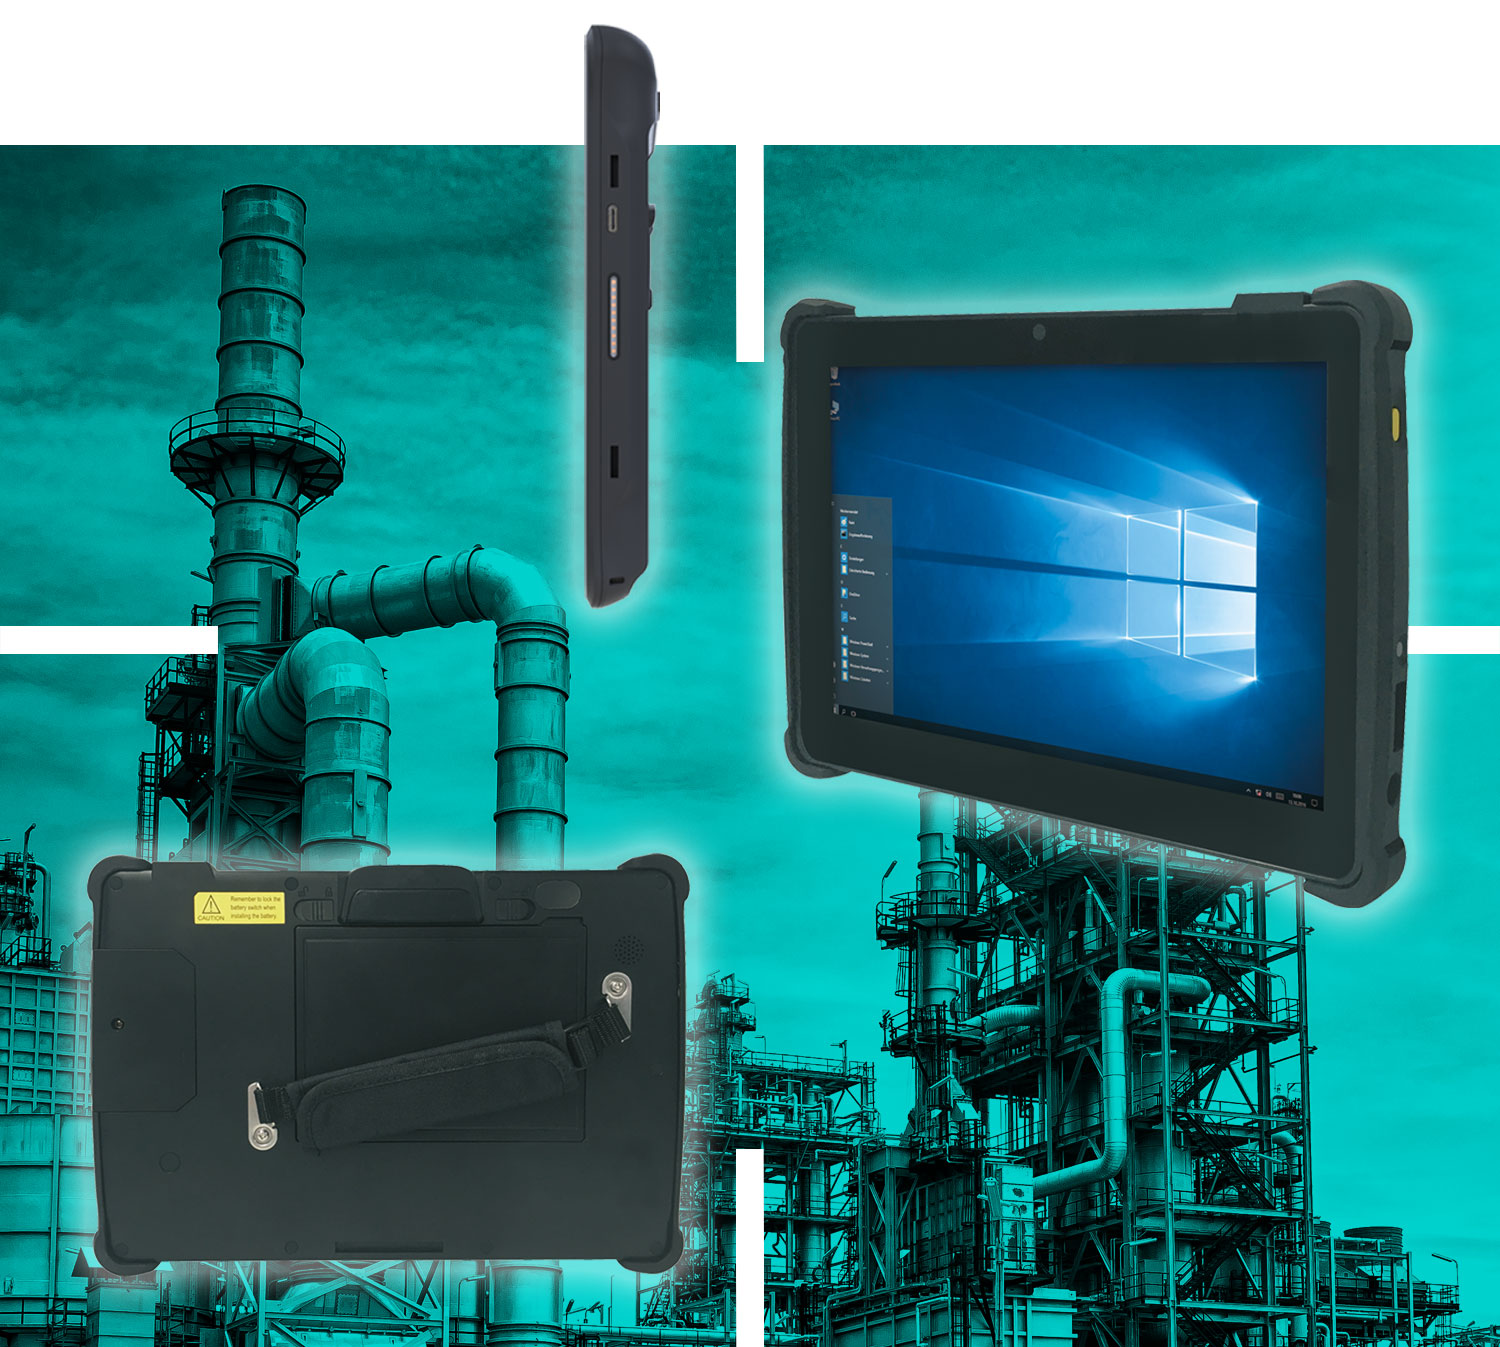 Rugged tablet and handheld PCs for harsh environments